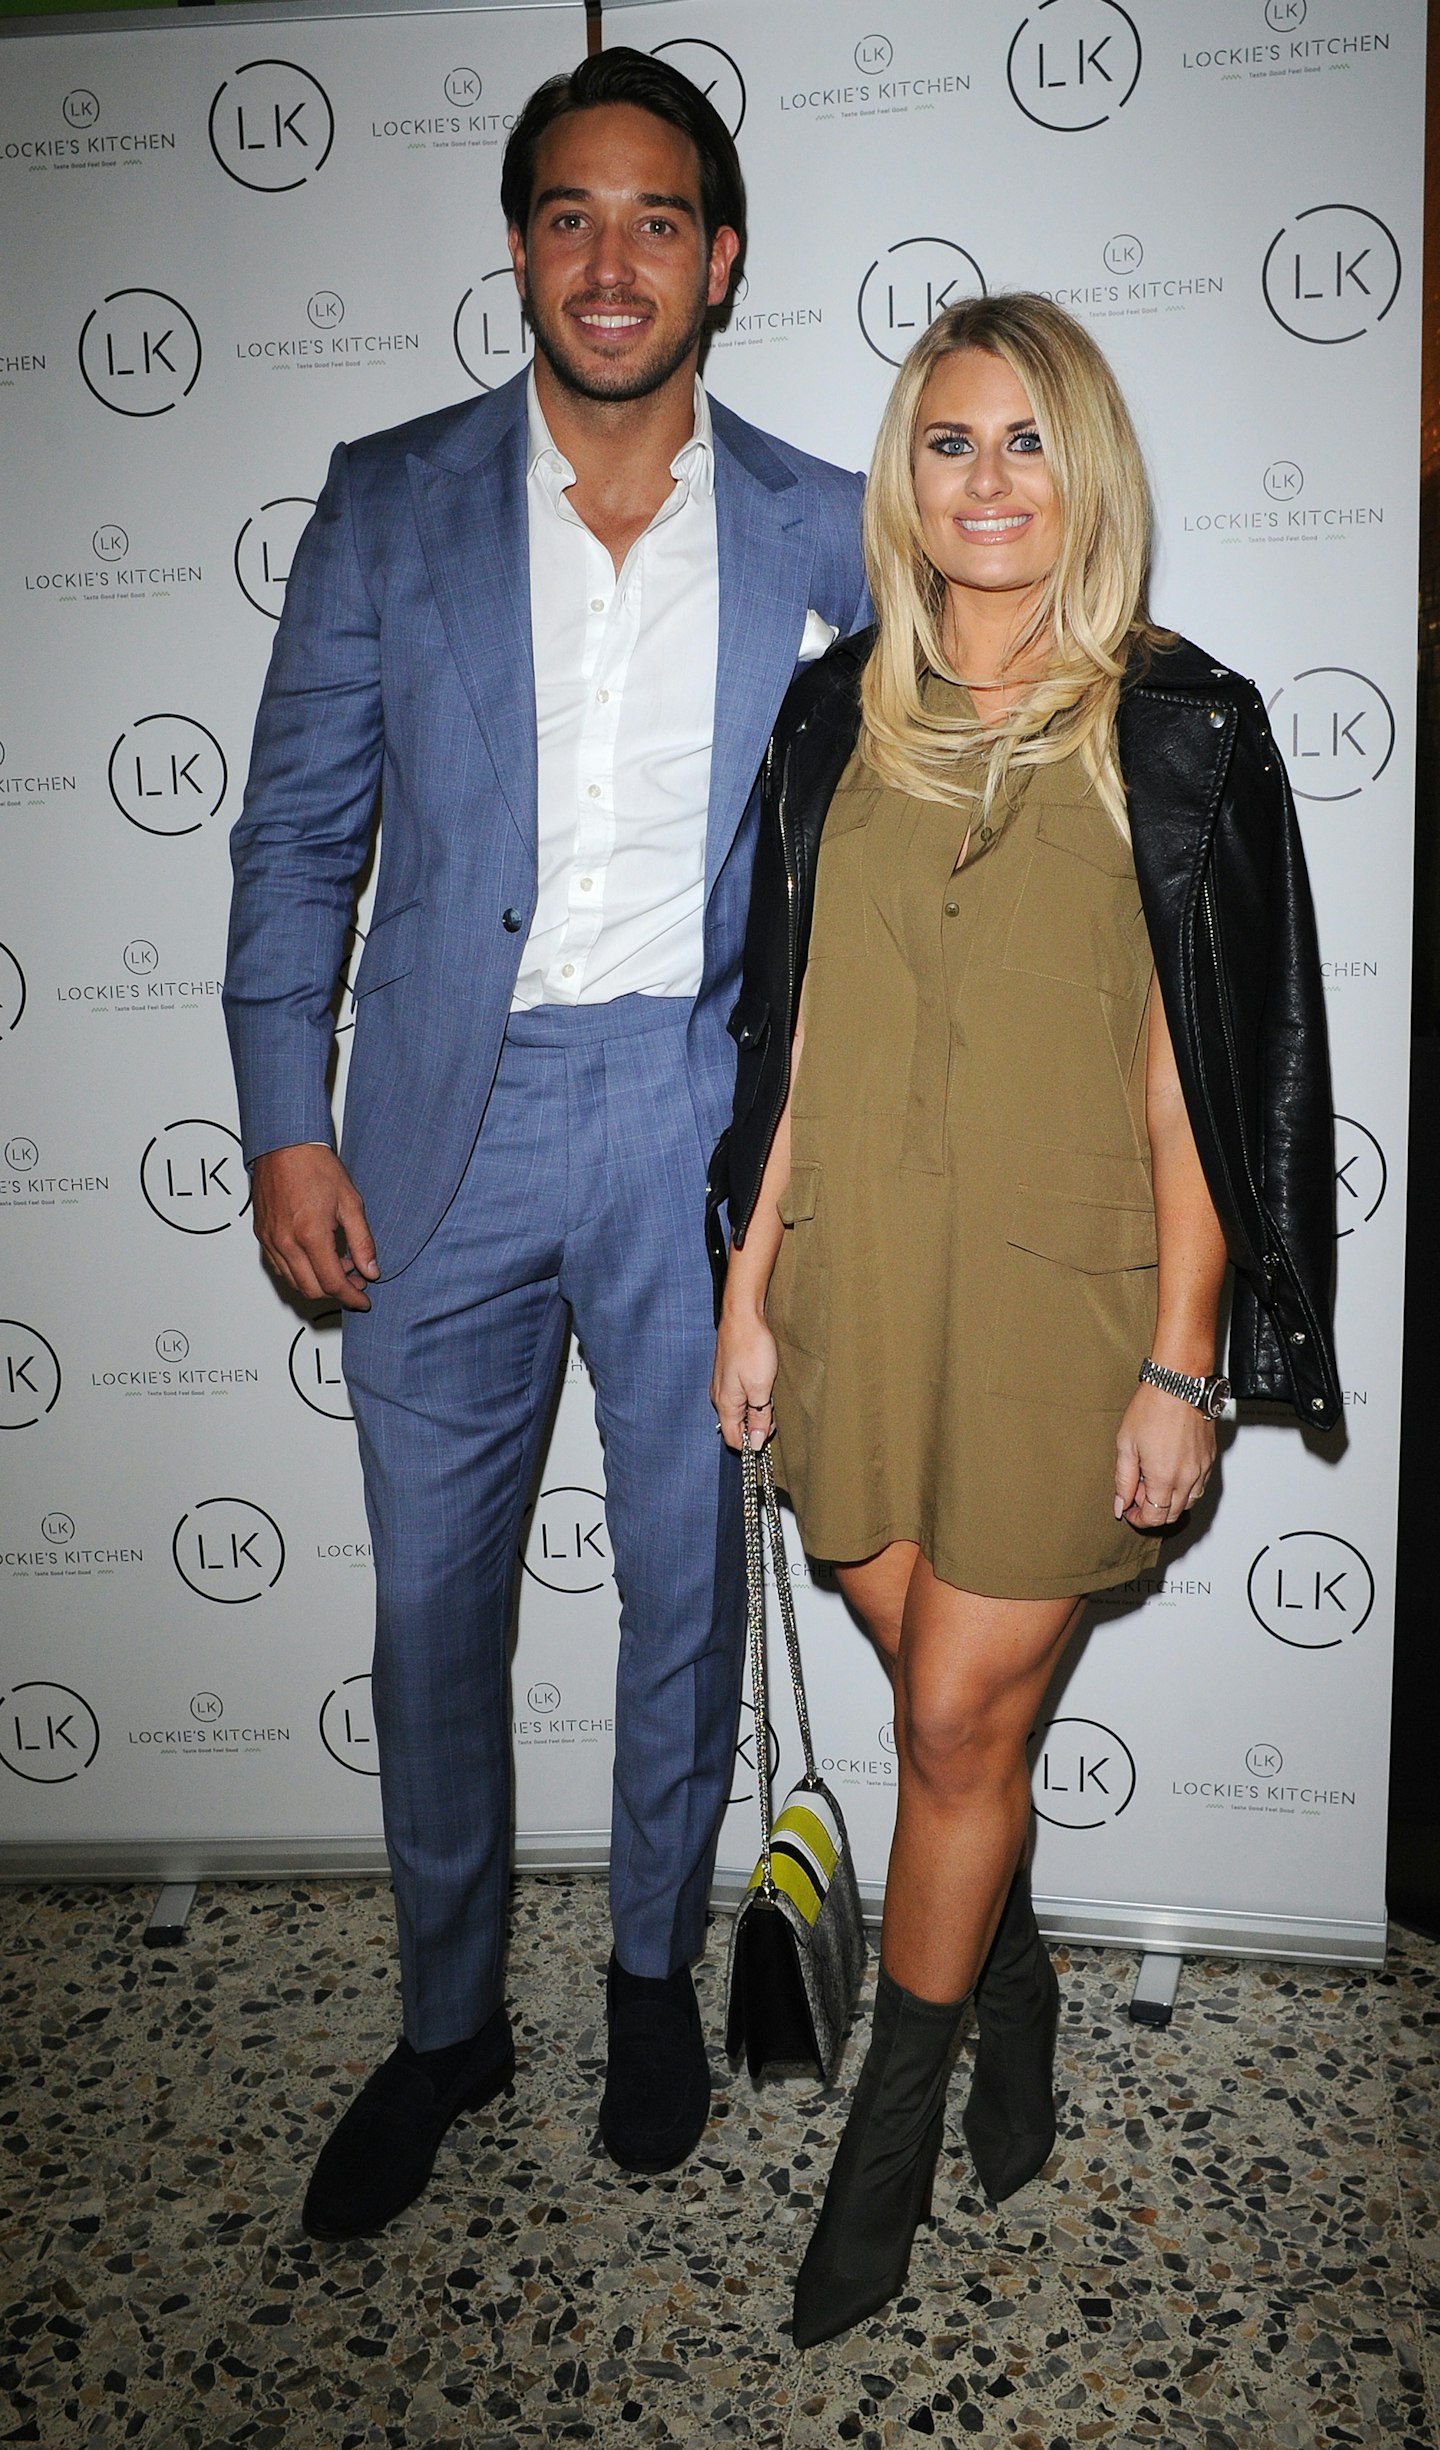 James Lock and Danielle Armstrong